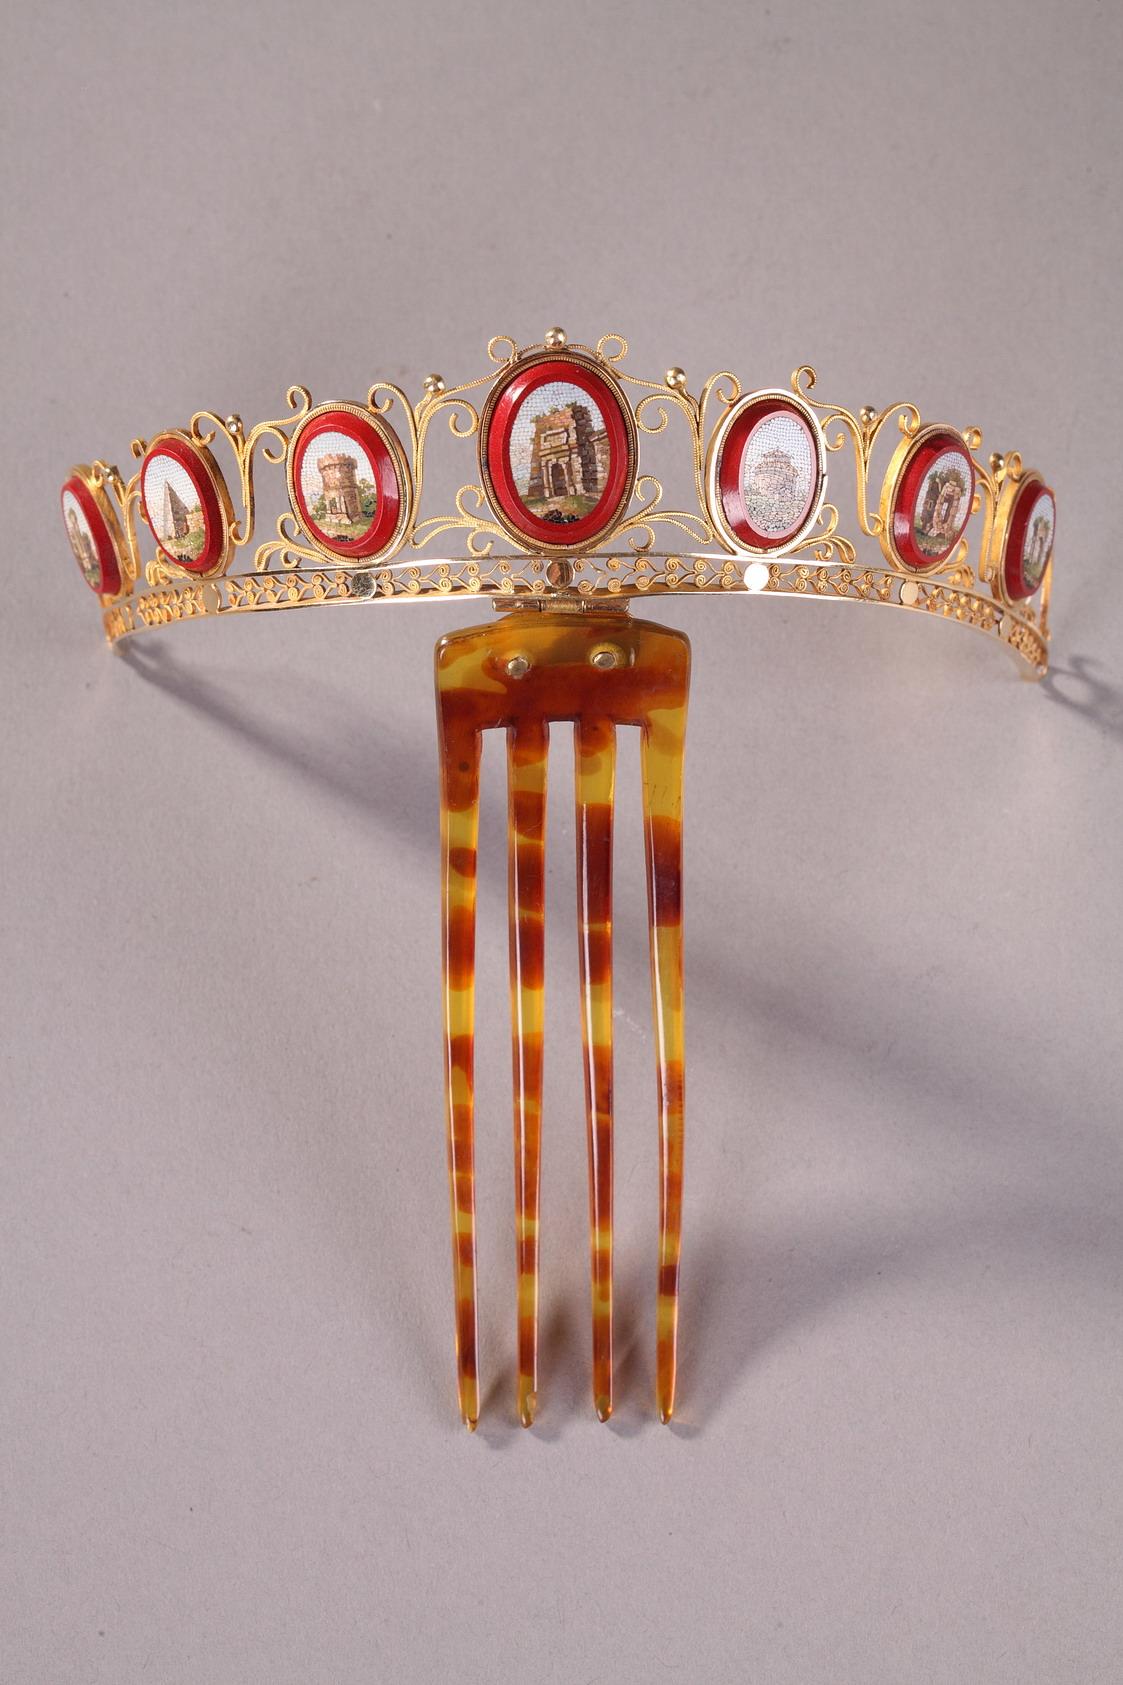 Diadem comb in gold featuring seven oval, micromosaic medallions. The removable comb of the diadem is composed of four, blonde tortoiseshell teeth. The curved diadem features micromosaic medallions set on a coral red background. Each medallion